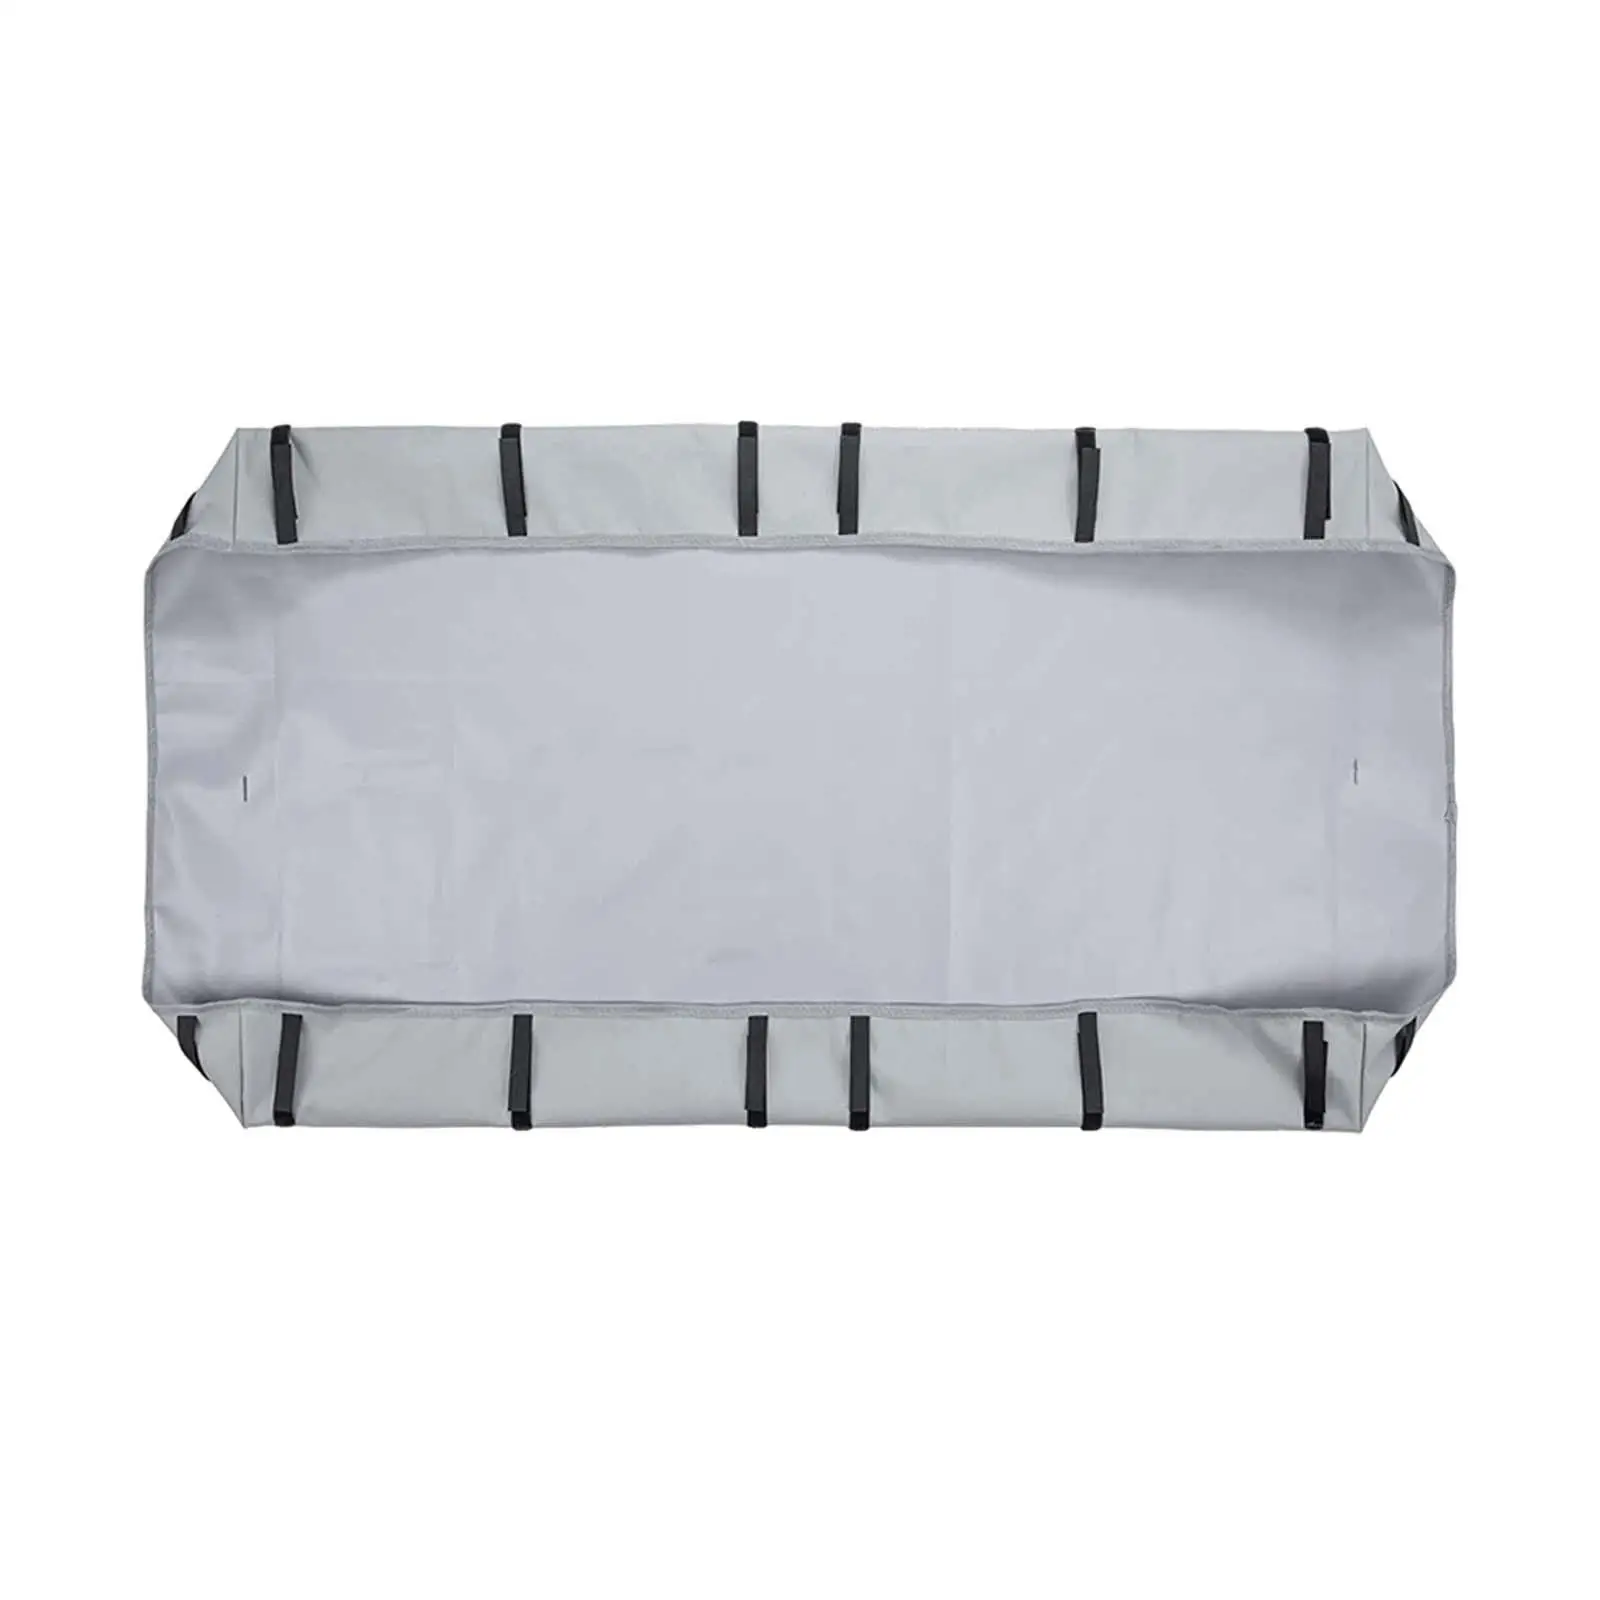 Guinea Pig Cage Tarp Bottom Durable Soft Waterproof for Grids Habitat for Rabbits Hamsters Chinchillas Small Animals Accessories